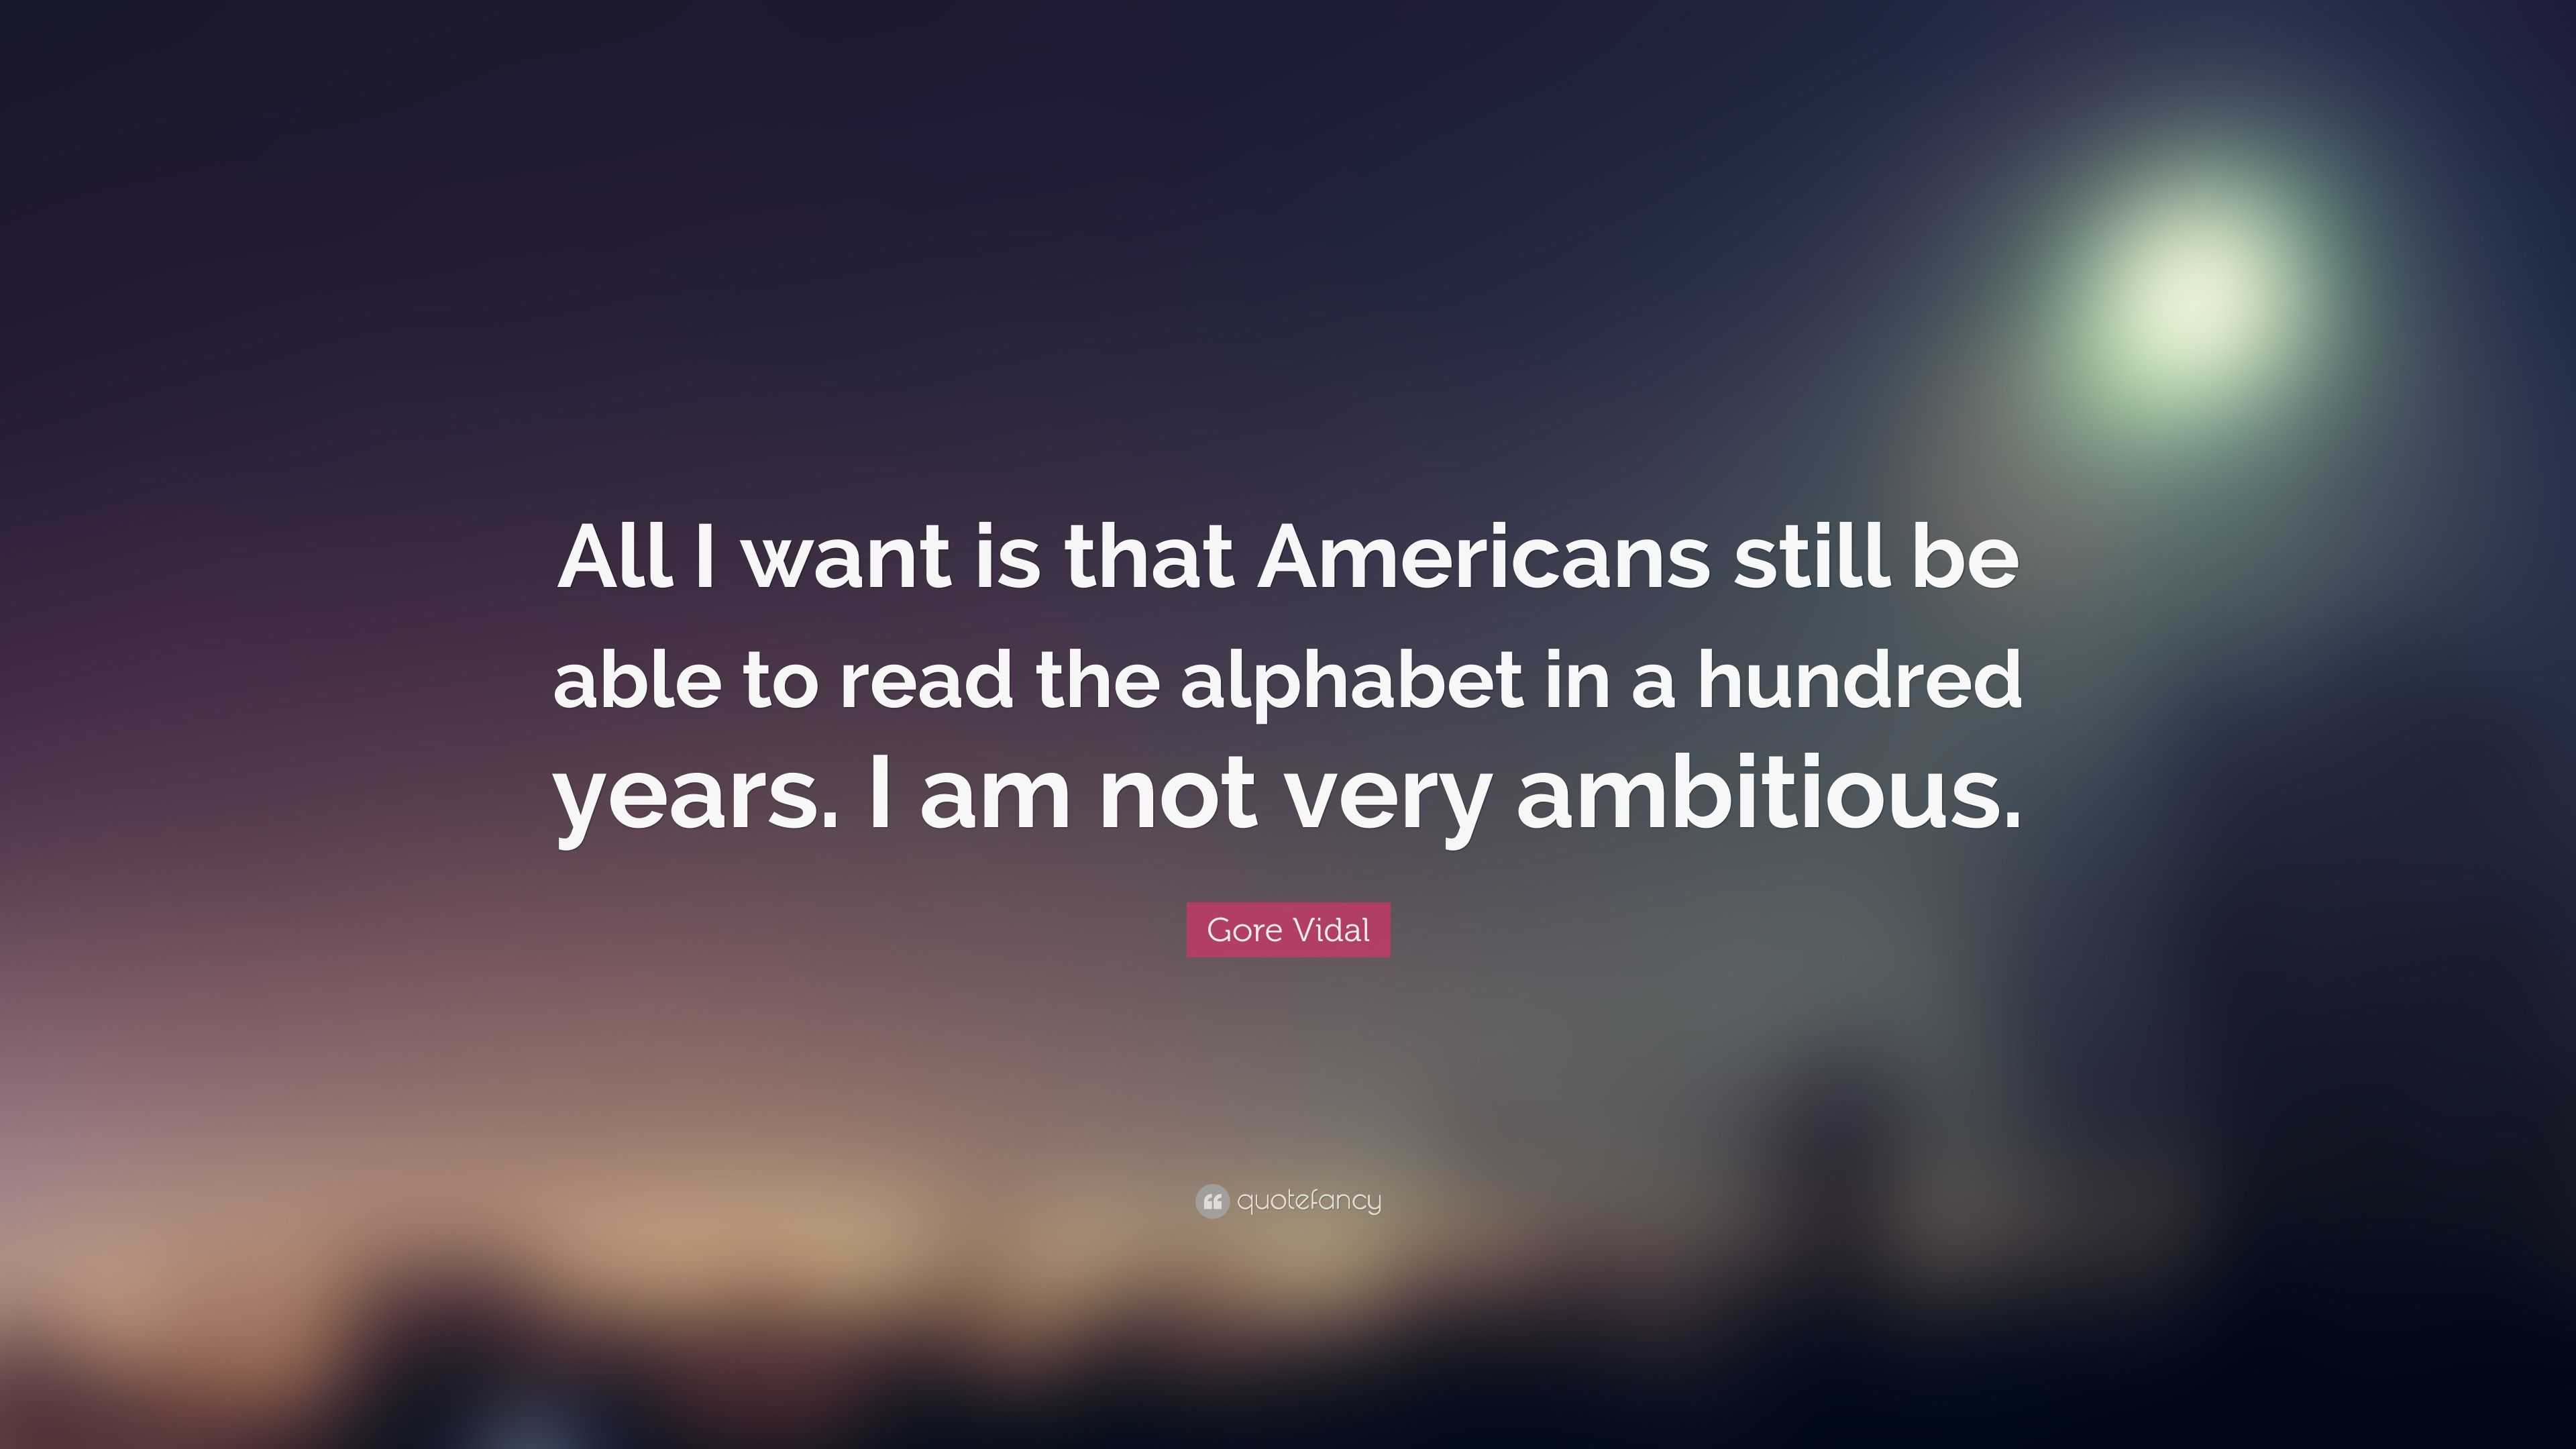 Gore Vidal Quote All I Want Is That Americans Still Be Able To